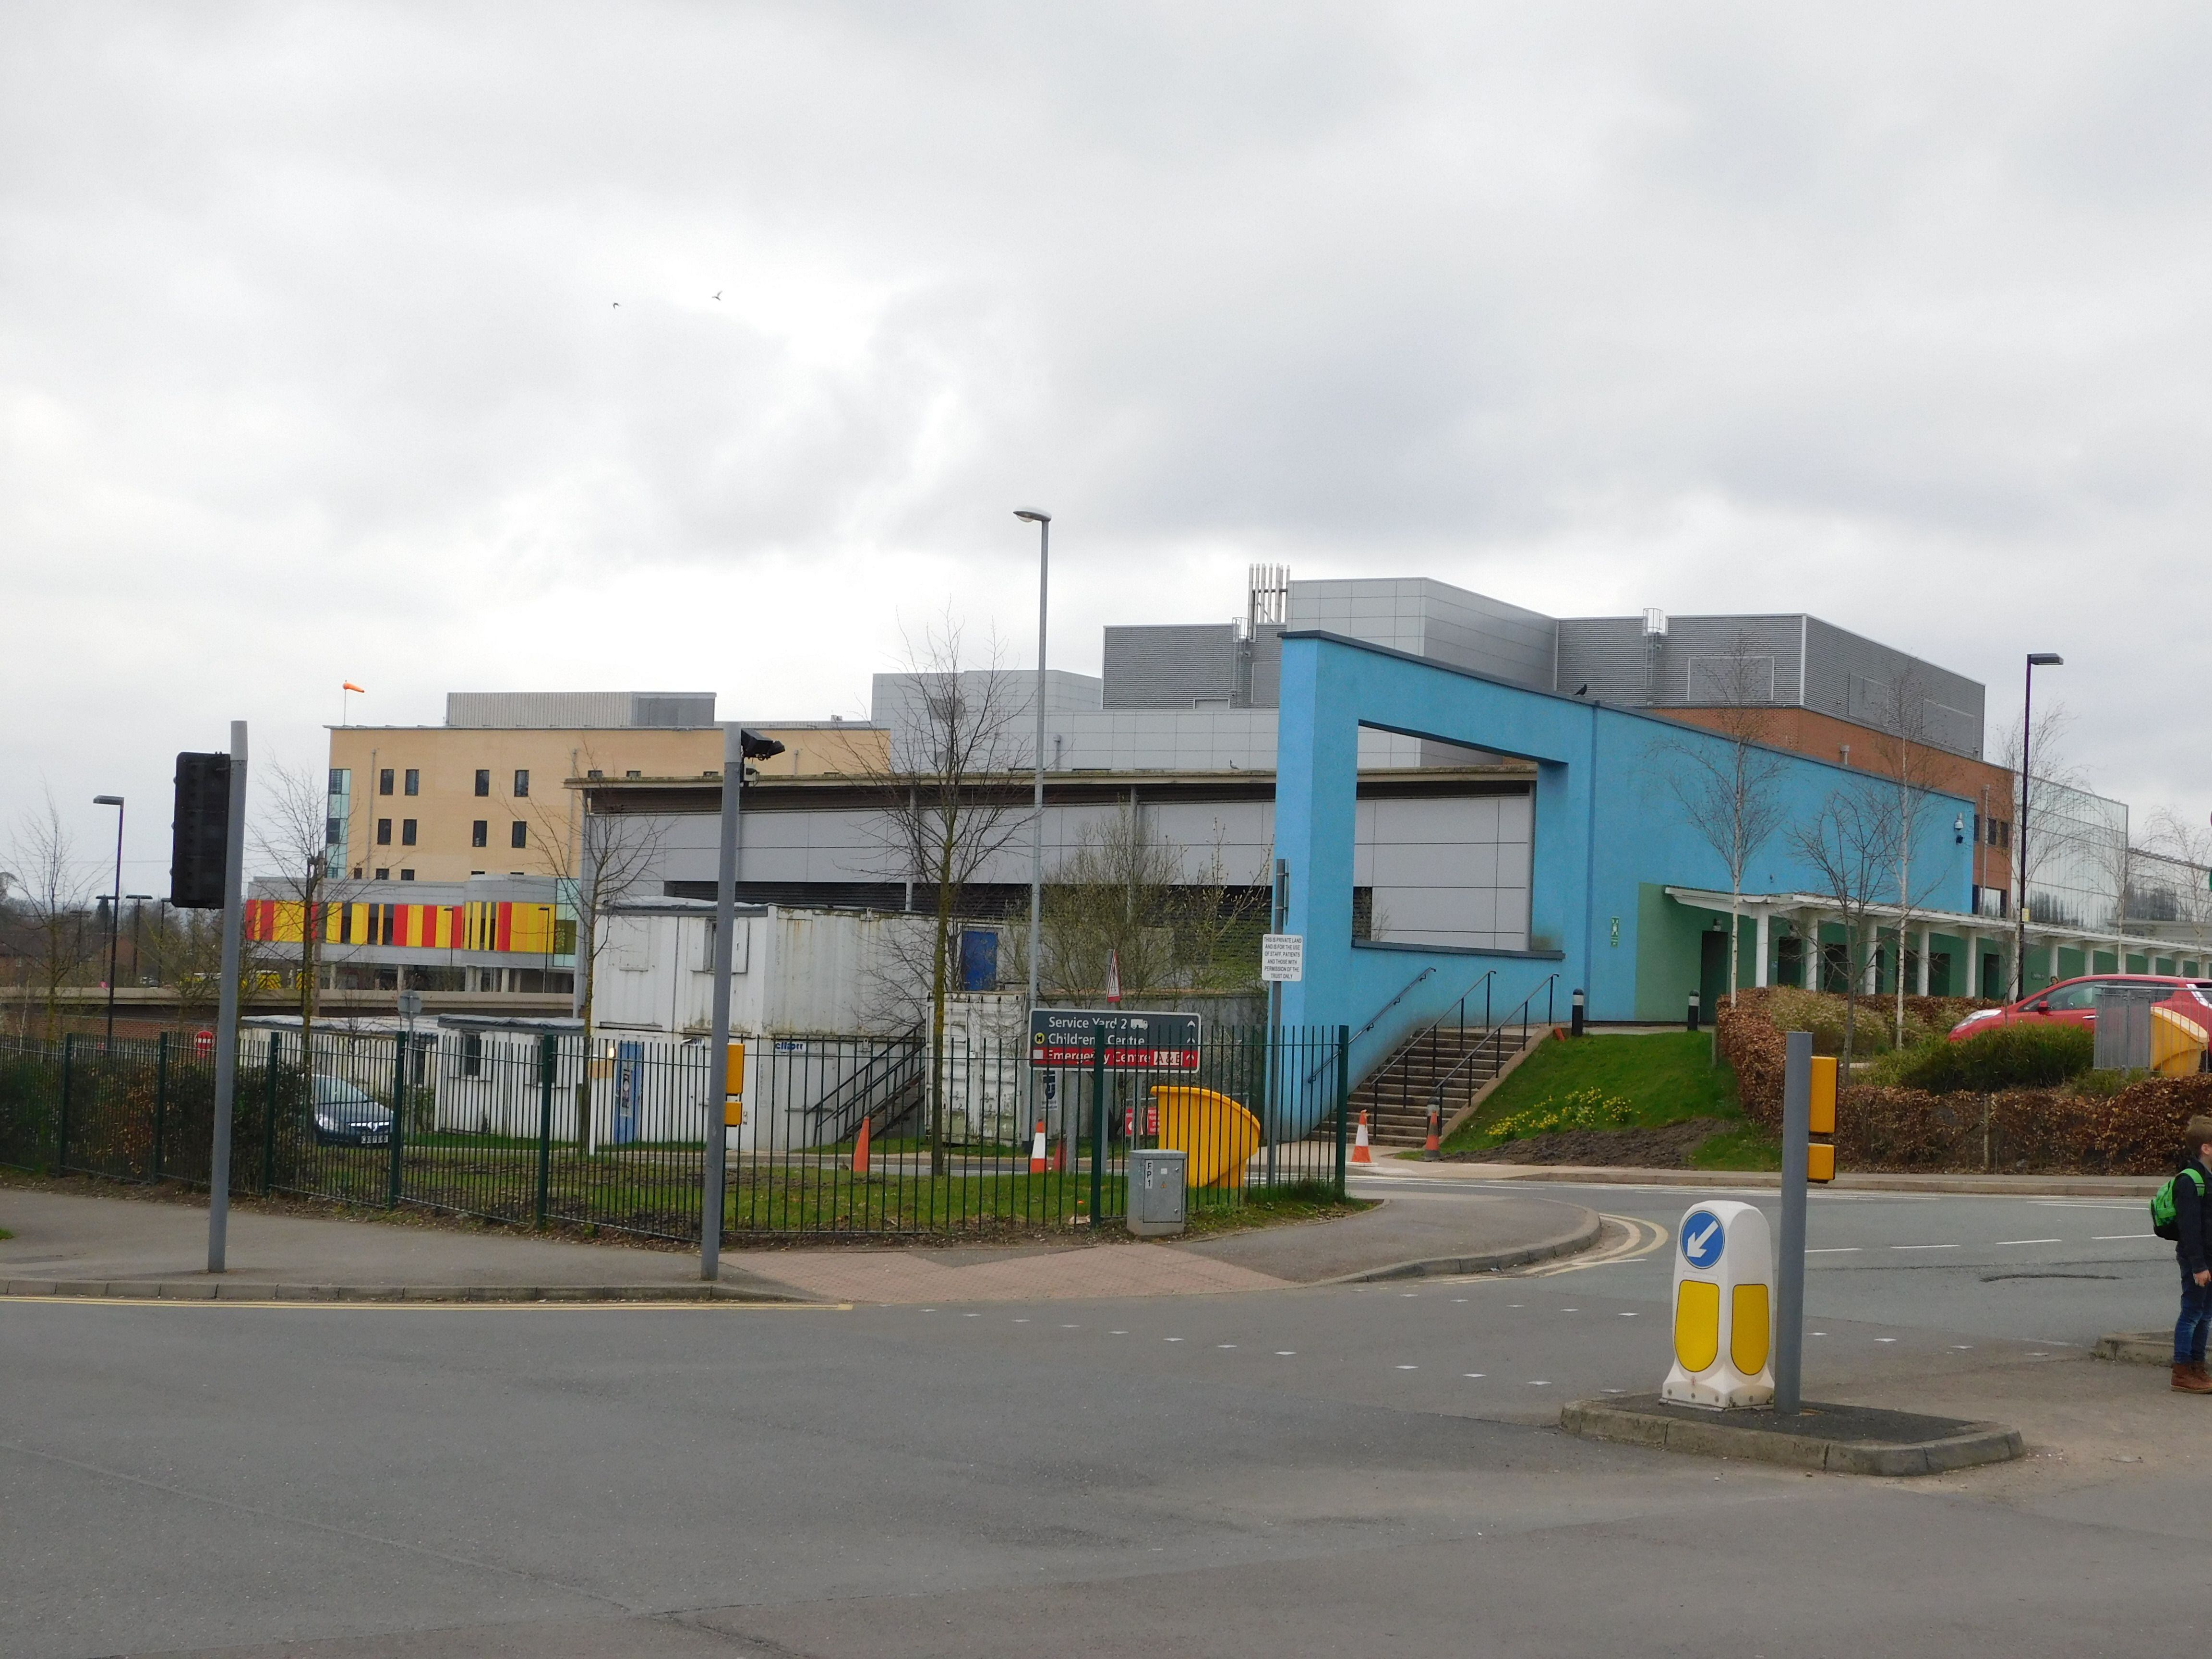 Hospital trust aiming to eliminate 18-month and 2-year waits for planned procedures by mid-July